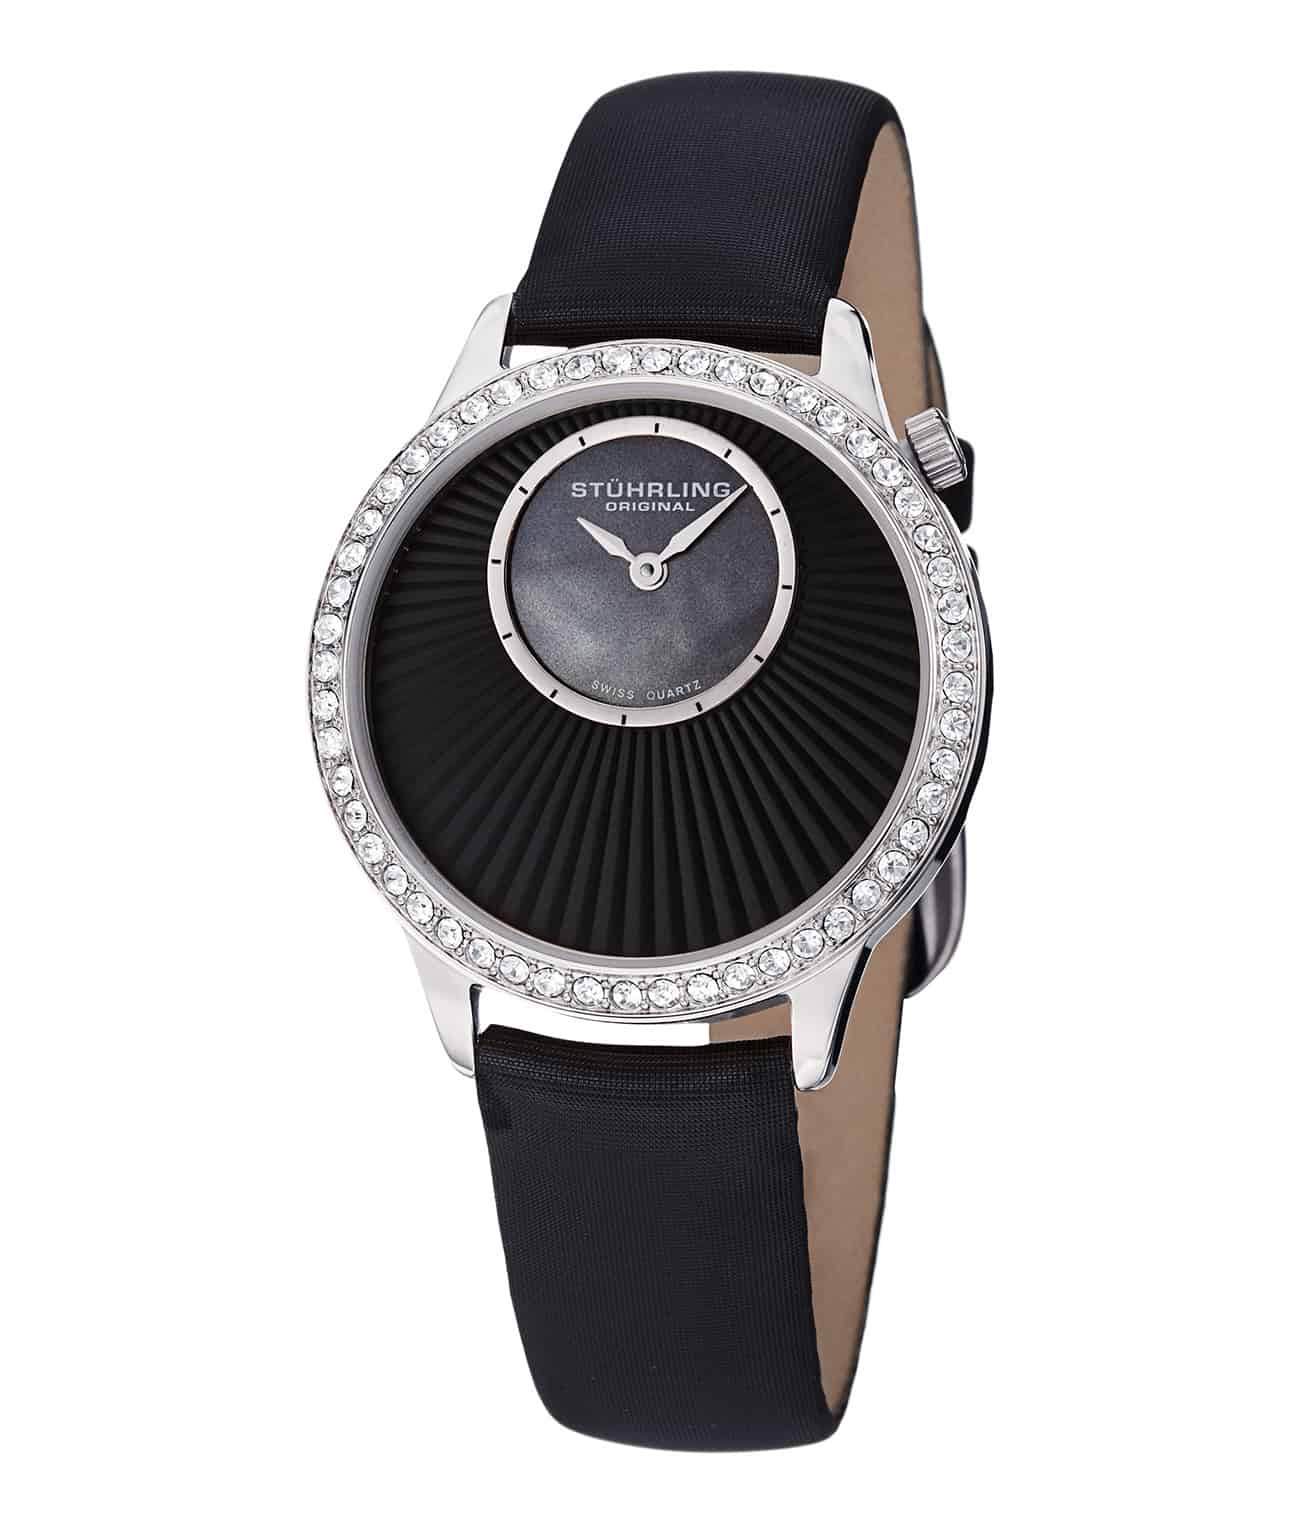 Gizmore Vogue 1.95 AOD 600 NITS | 320 X 385 PX HD Display Bluetooth Calling  Smartwatch Price in India - Buy Gizmore Vogue 1.95 AOD 600 NITS | 320 X 385  PX HD Display Bluetooth Calling Smartwatch online at Flipkart.com